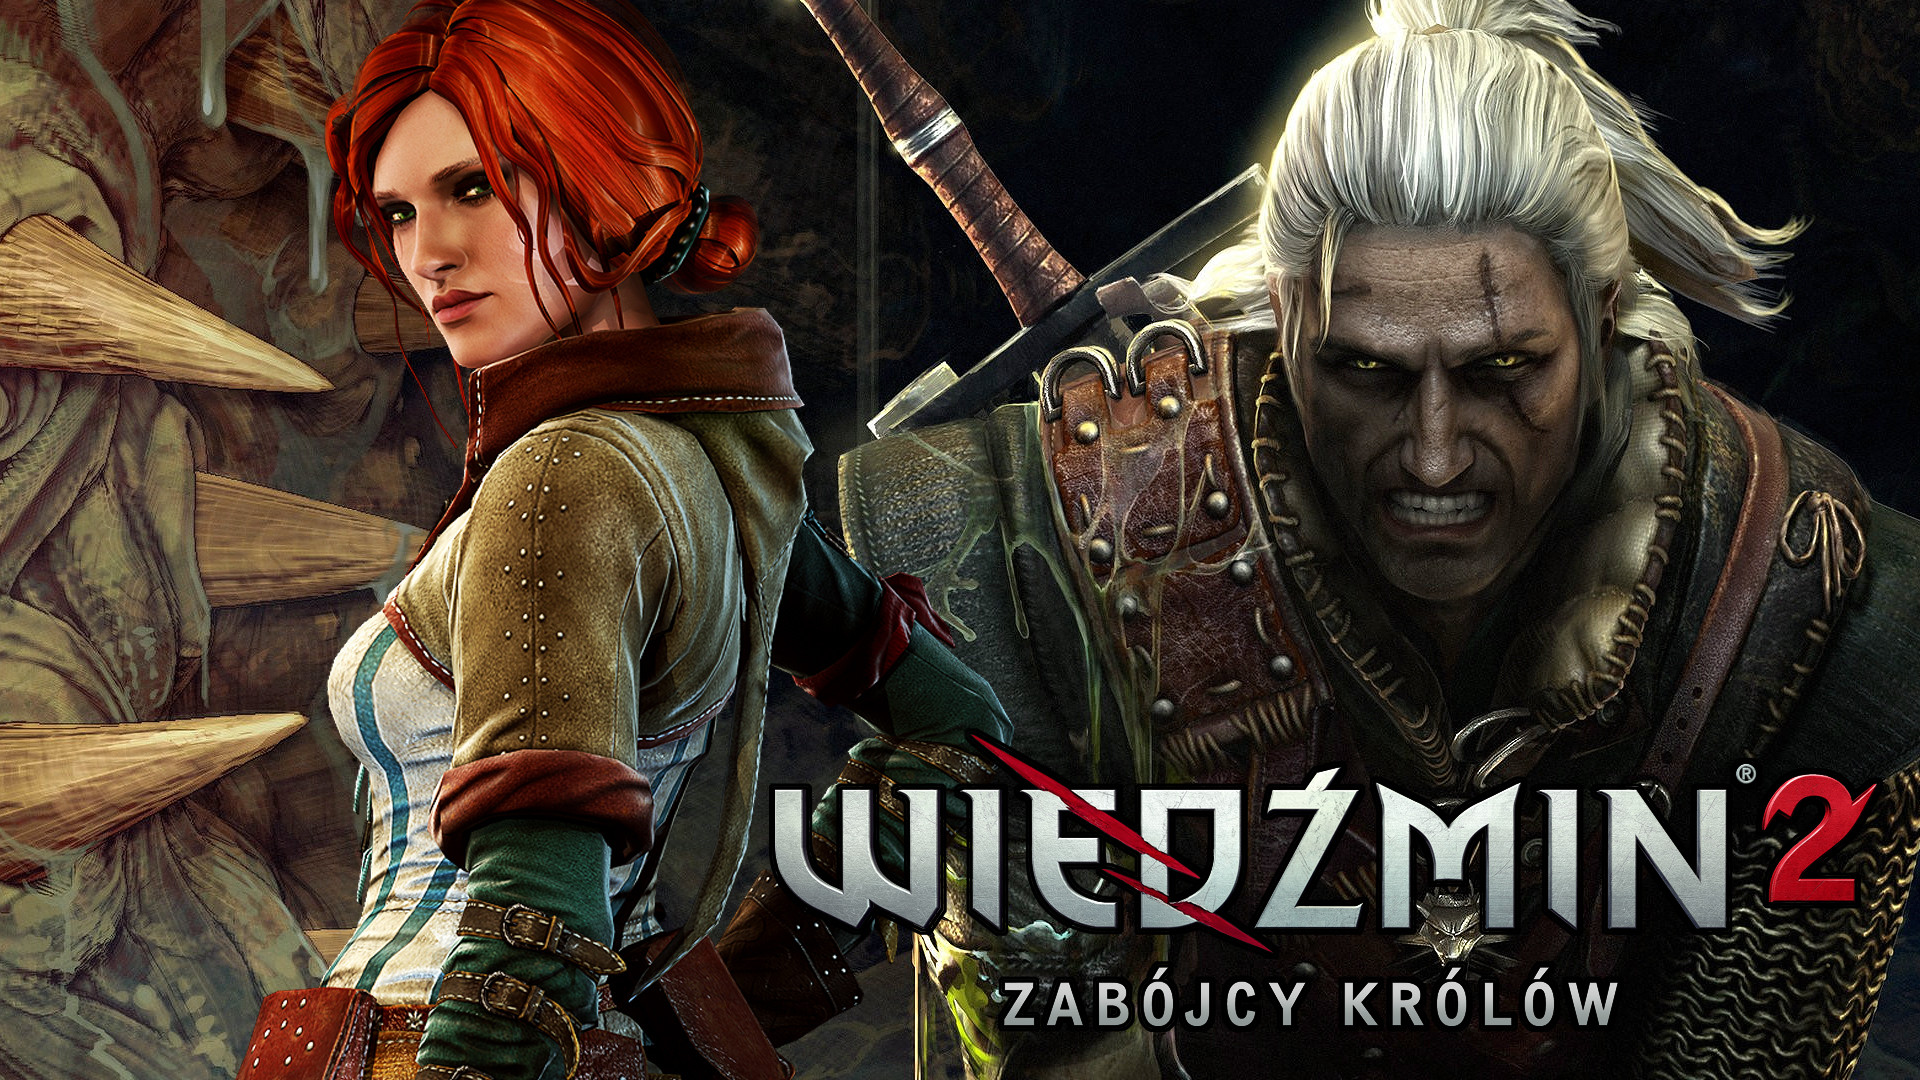 1920x1080 Video Game - The Witcher 2: Assassins Of Kings Triss Merigold Wallpaper